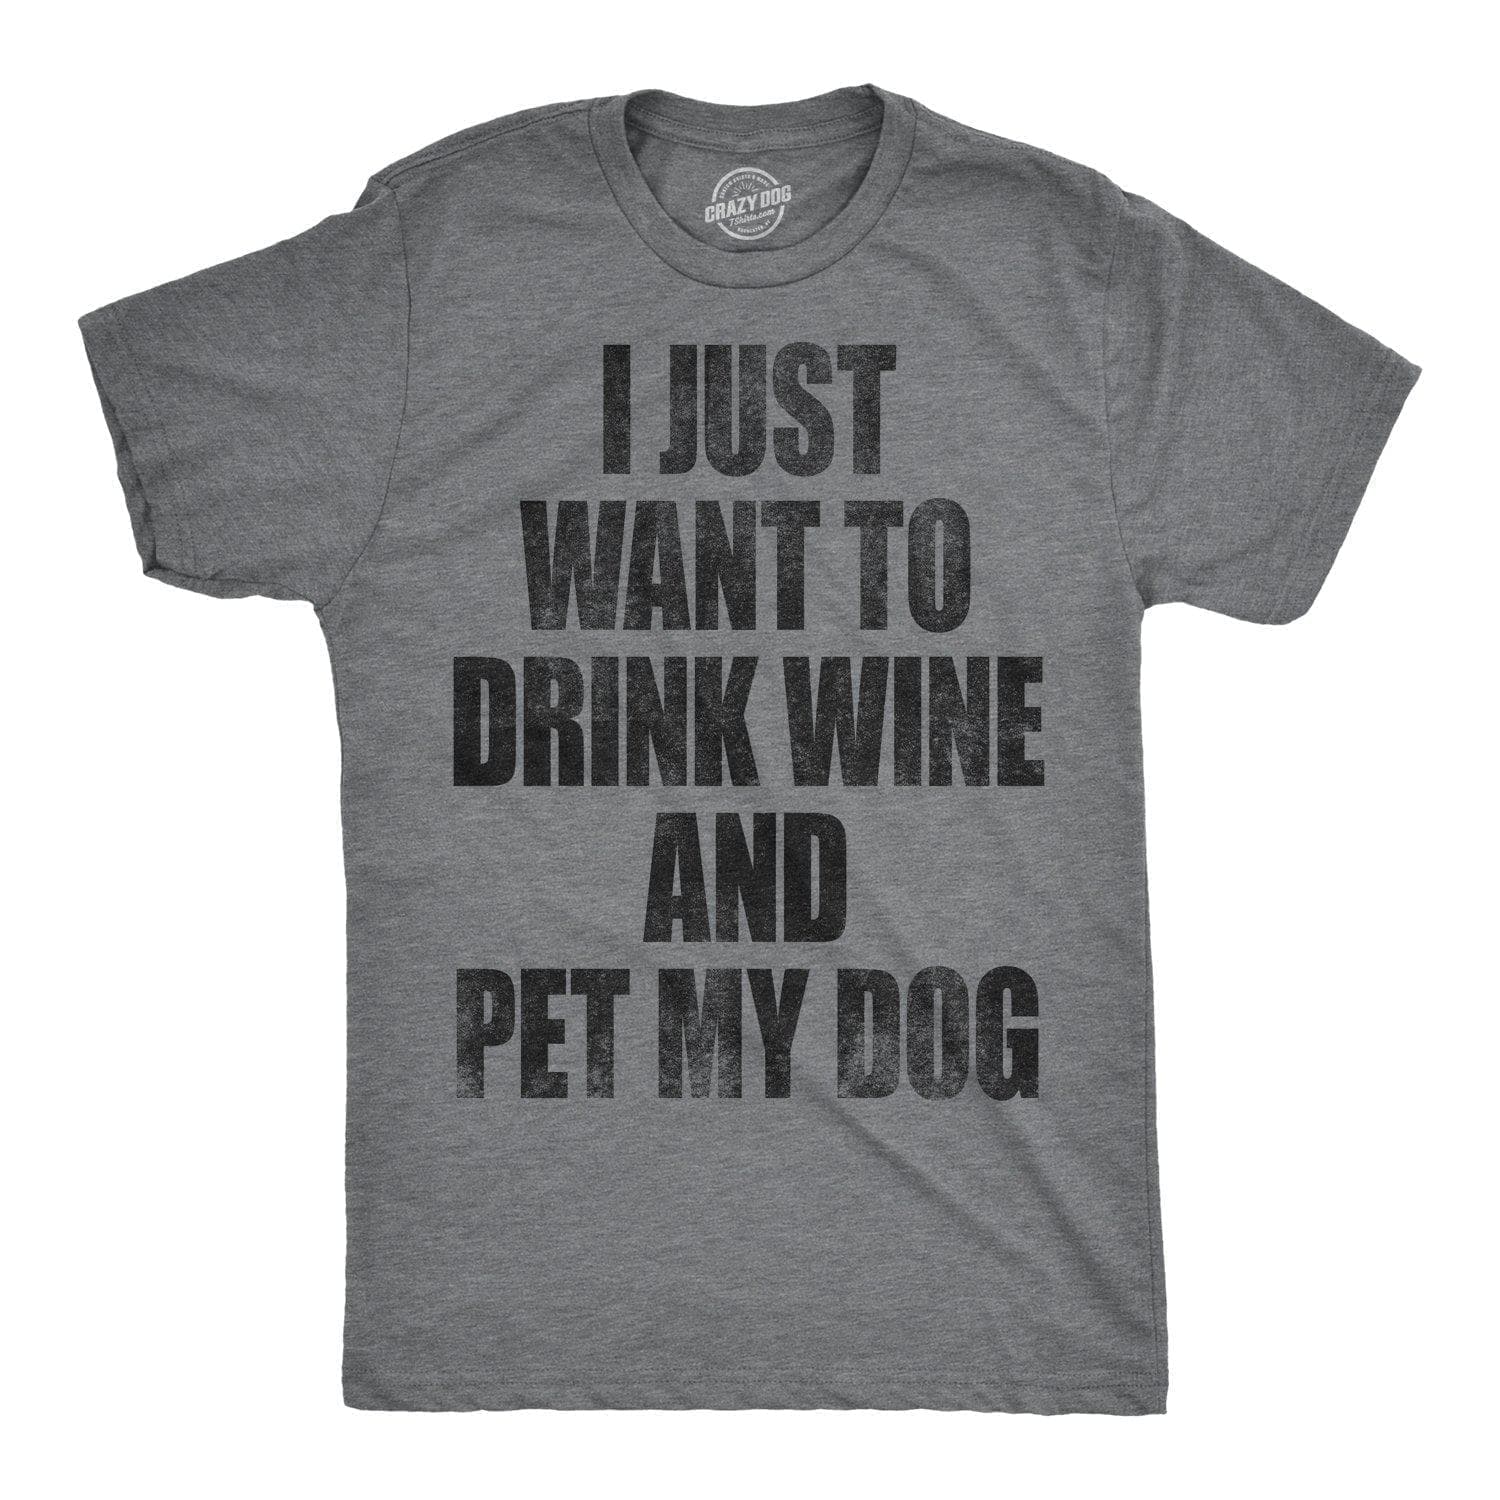 I Just Want To Drink Wine and Pet My Dog Men's Tshirt  -  Crazy Dog T-Shirts